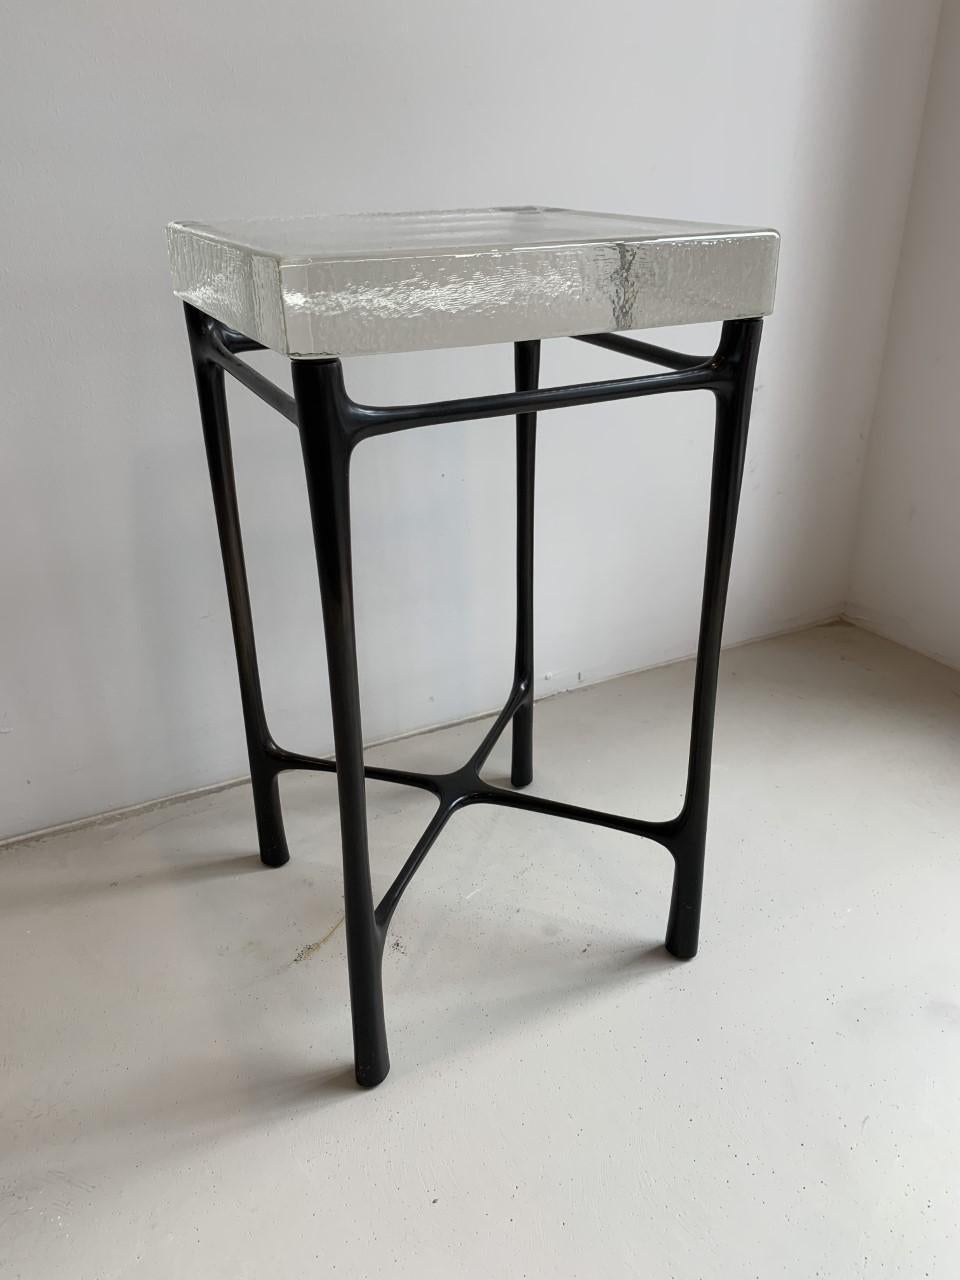 Dark Cast bronze base with clear cast glass top.